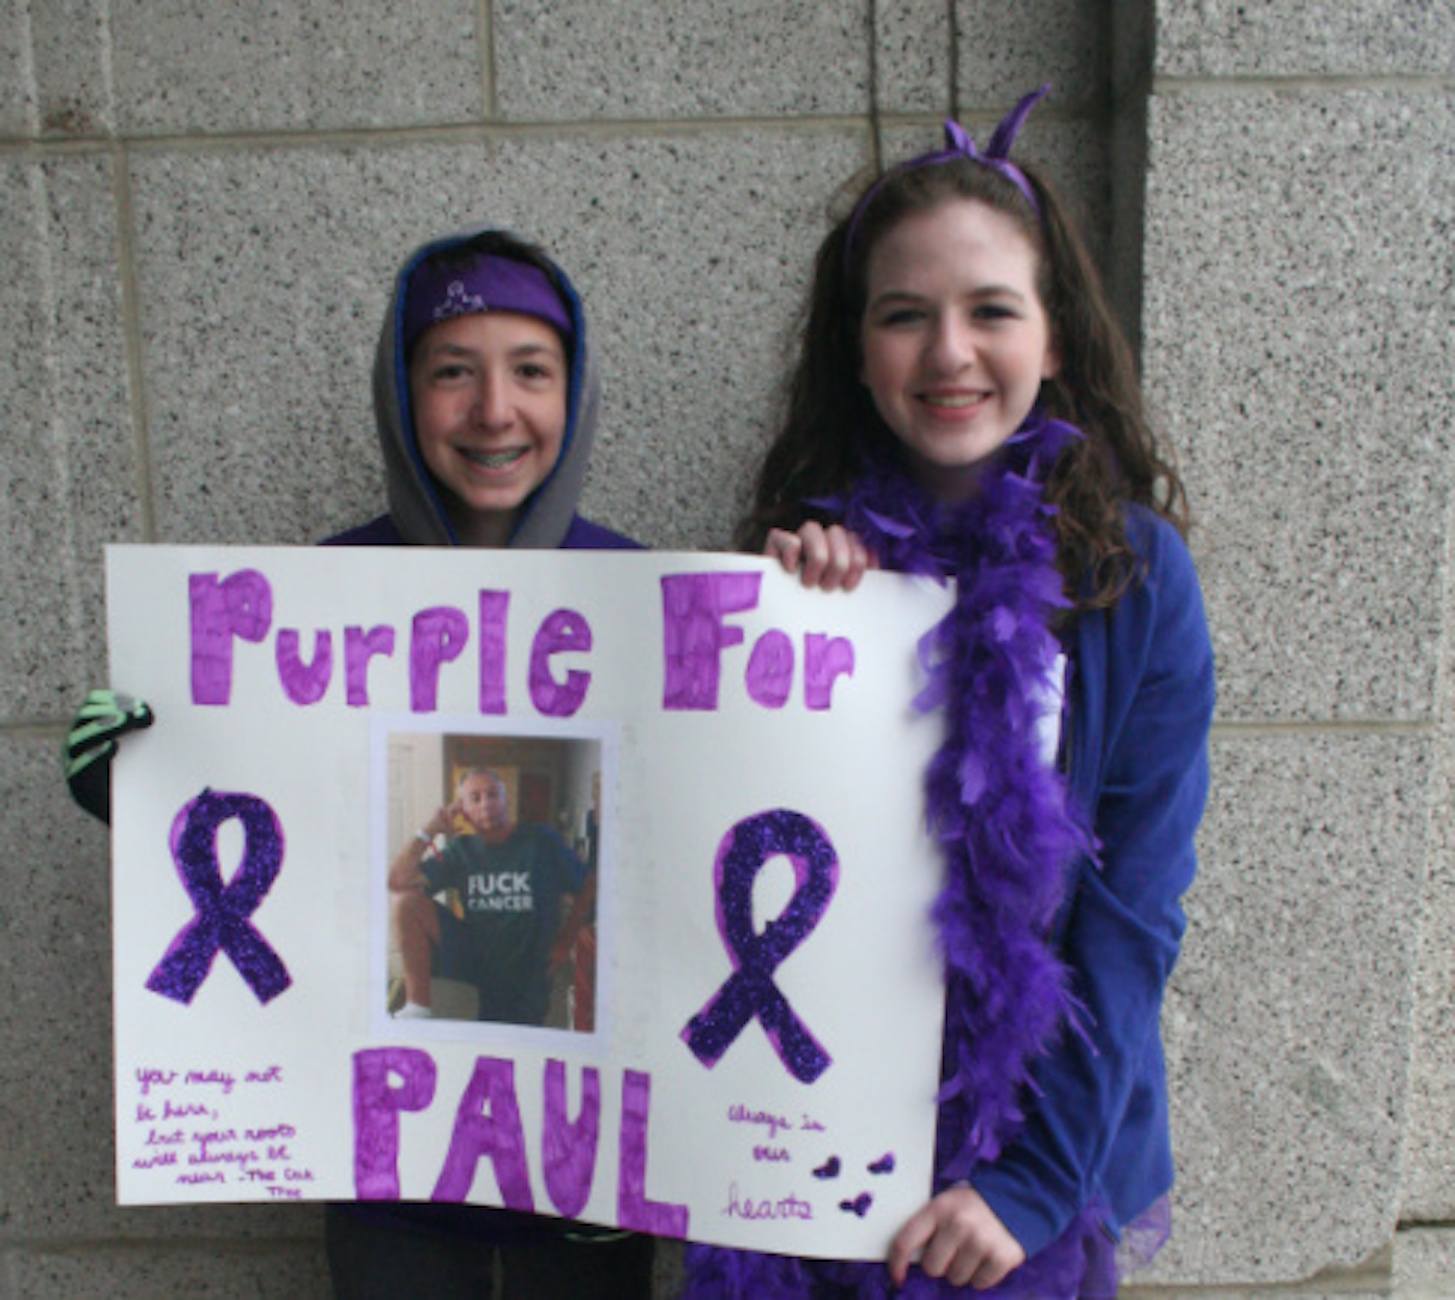 Two people holding a handmade sign that says "Purple for Paul" with a photo and purple ribbons